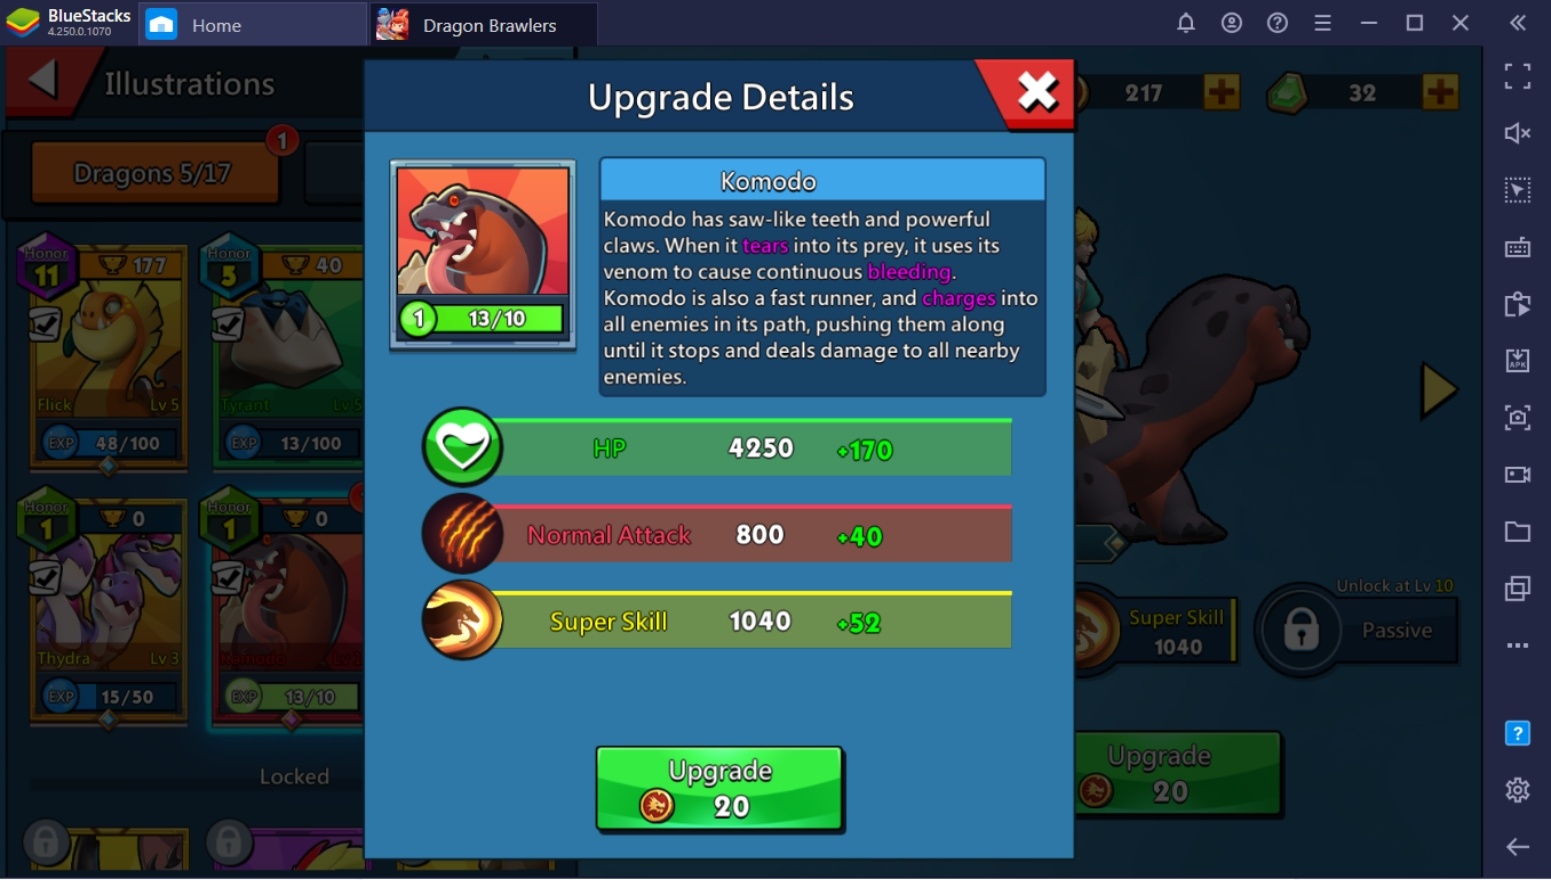 Tips and Tricks To Win More in Dragon Brawlers